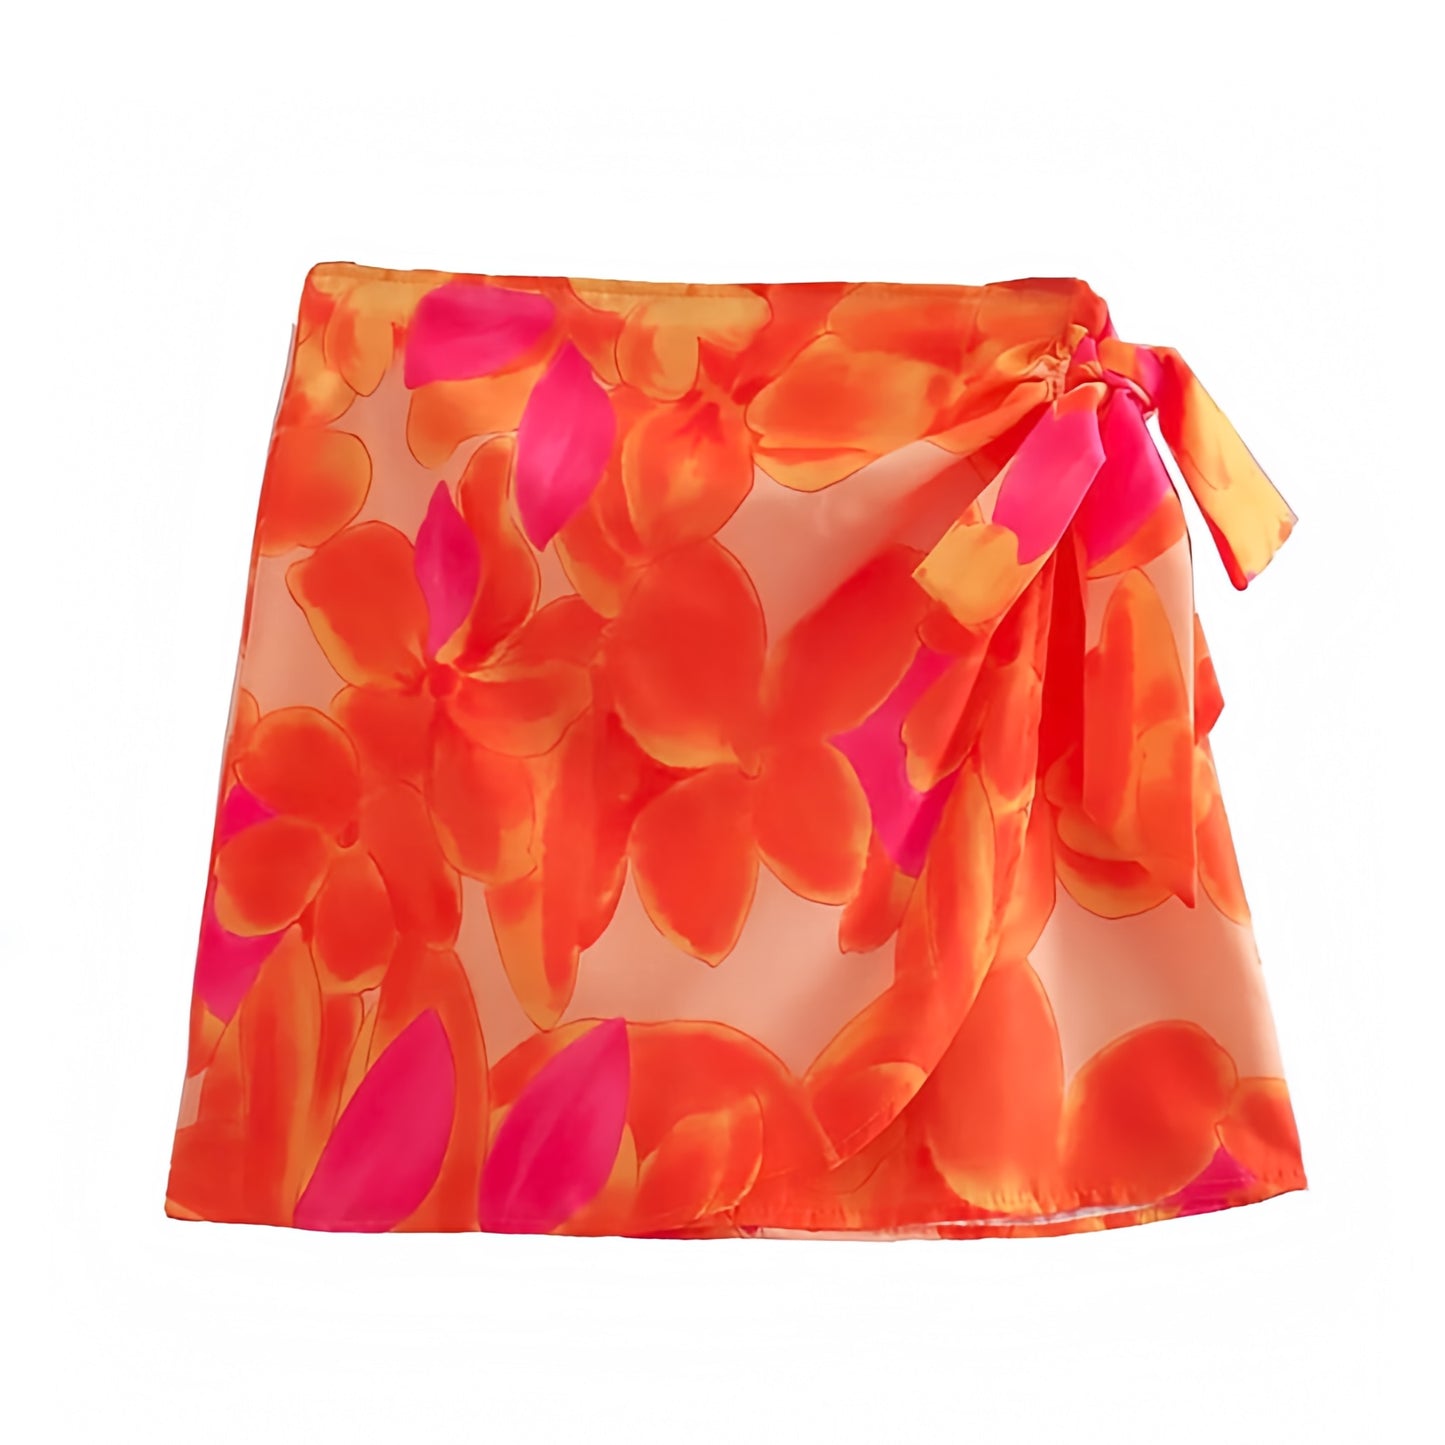 orange-yellow-pink-multi-color-floral-flower-tie-dye-patterned-slim-fit-mid-low-rise-waisted-fitted-waist-ruffled-linen-boho-flowy-knot-tie-mini-skirt-women-ladies-teens-tweens-chic-trendy-spring-2024-summer-elegant-casual-feminine-preppy-style-cocktail-party-club-sexy-night-out-tropical-exotic-hawaiian-vacation-beach-wear-zara-aritzia-revolve-urban-outfitters-whitefox-princess-polly-edikted-dupe